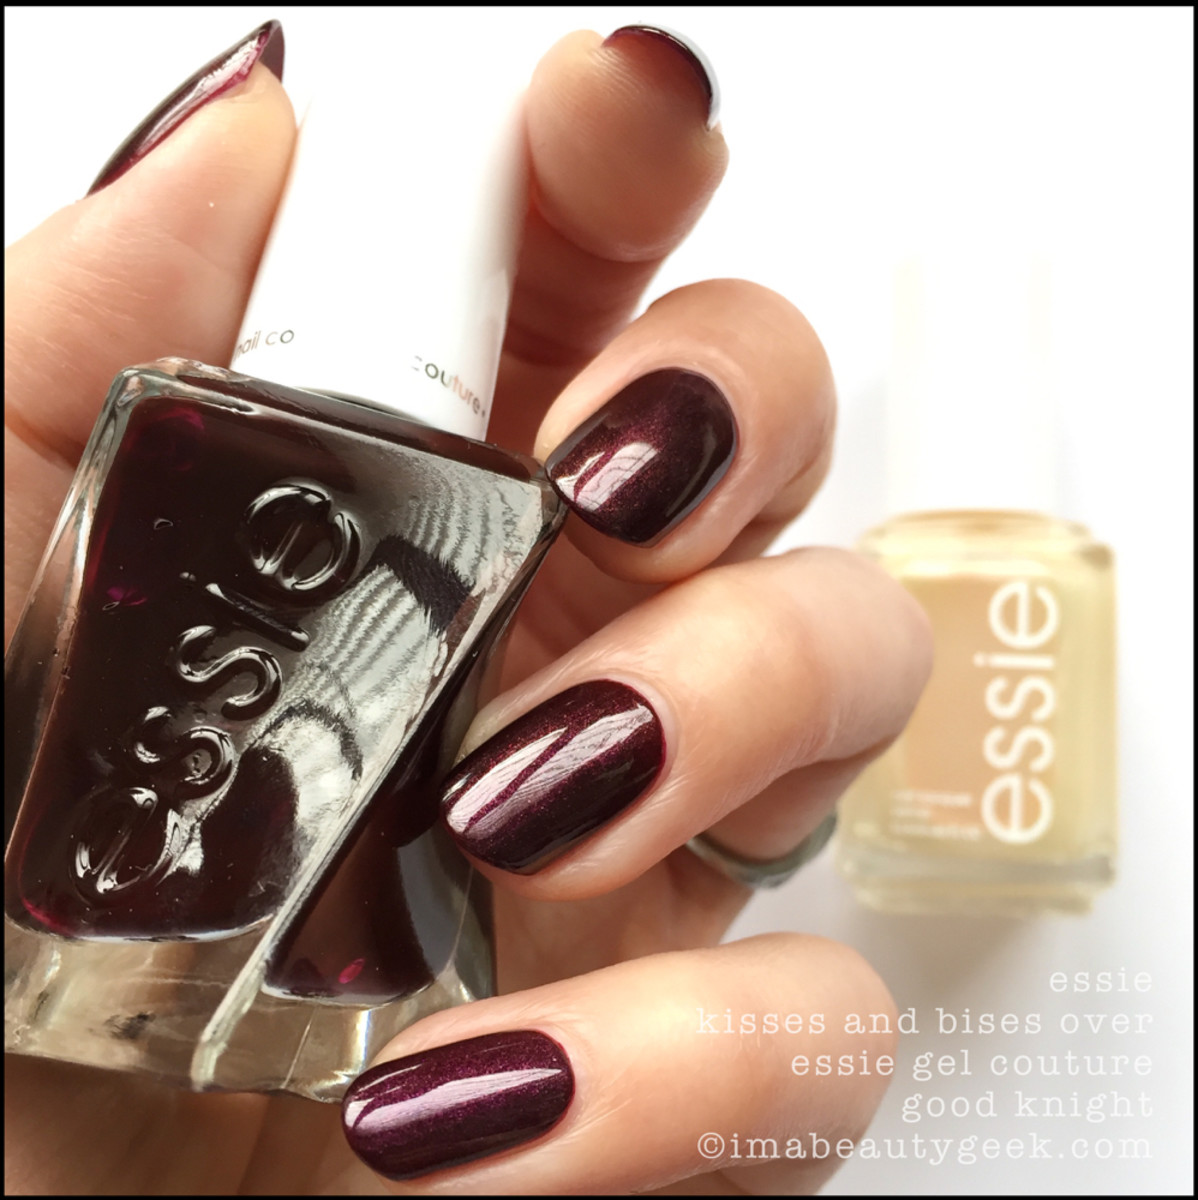 Essie Kisses and Bises over Good Knight _ Essie Gel Couture Spellbound Enchanted Collection 2018